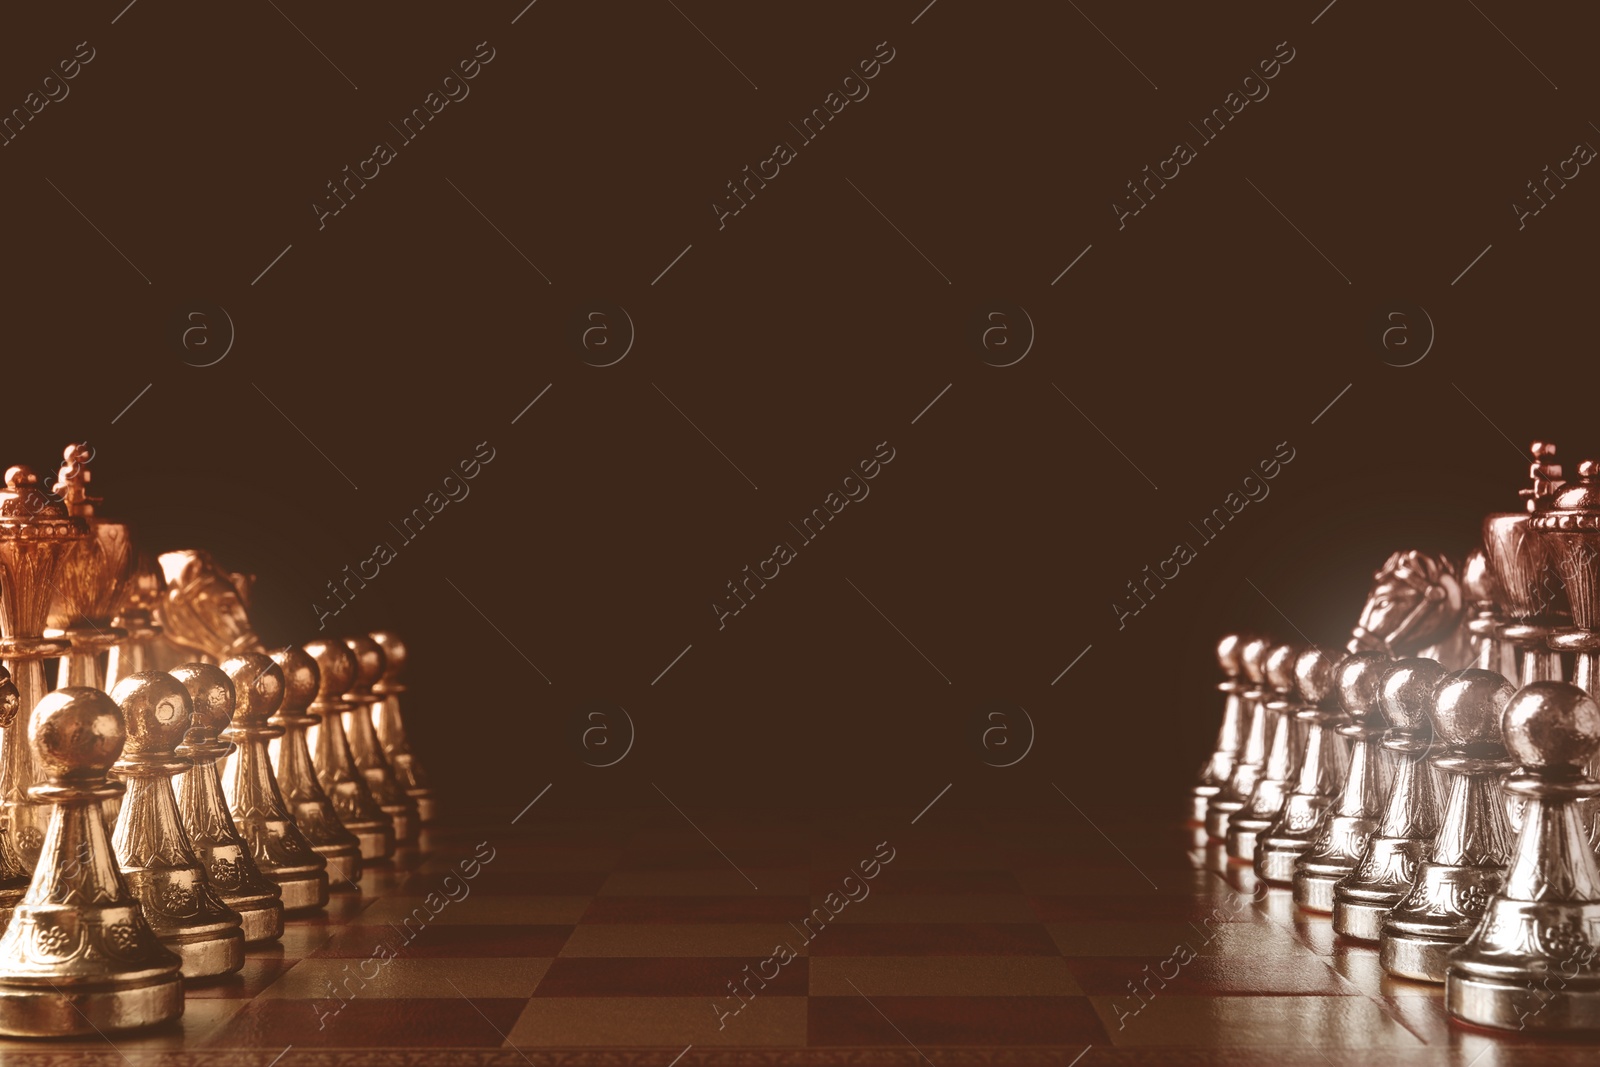 Image of Chessboard with game pieces in starting position on black background, sepia toned